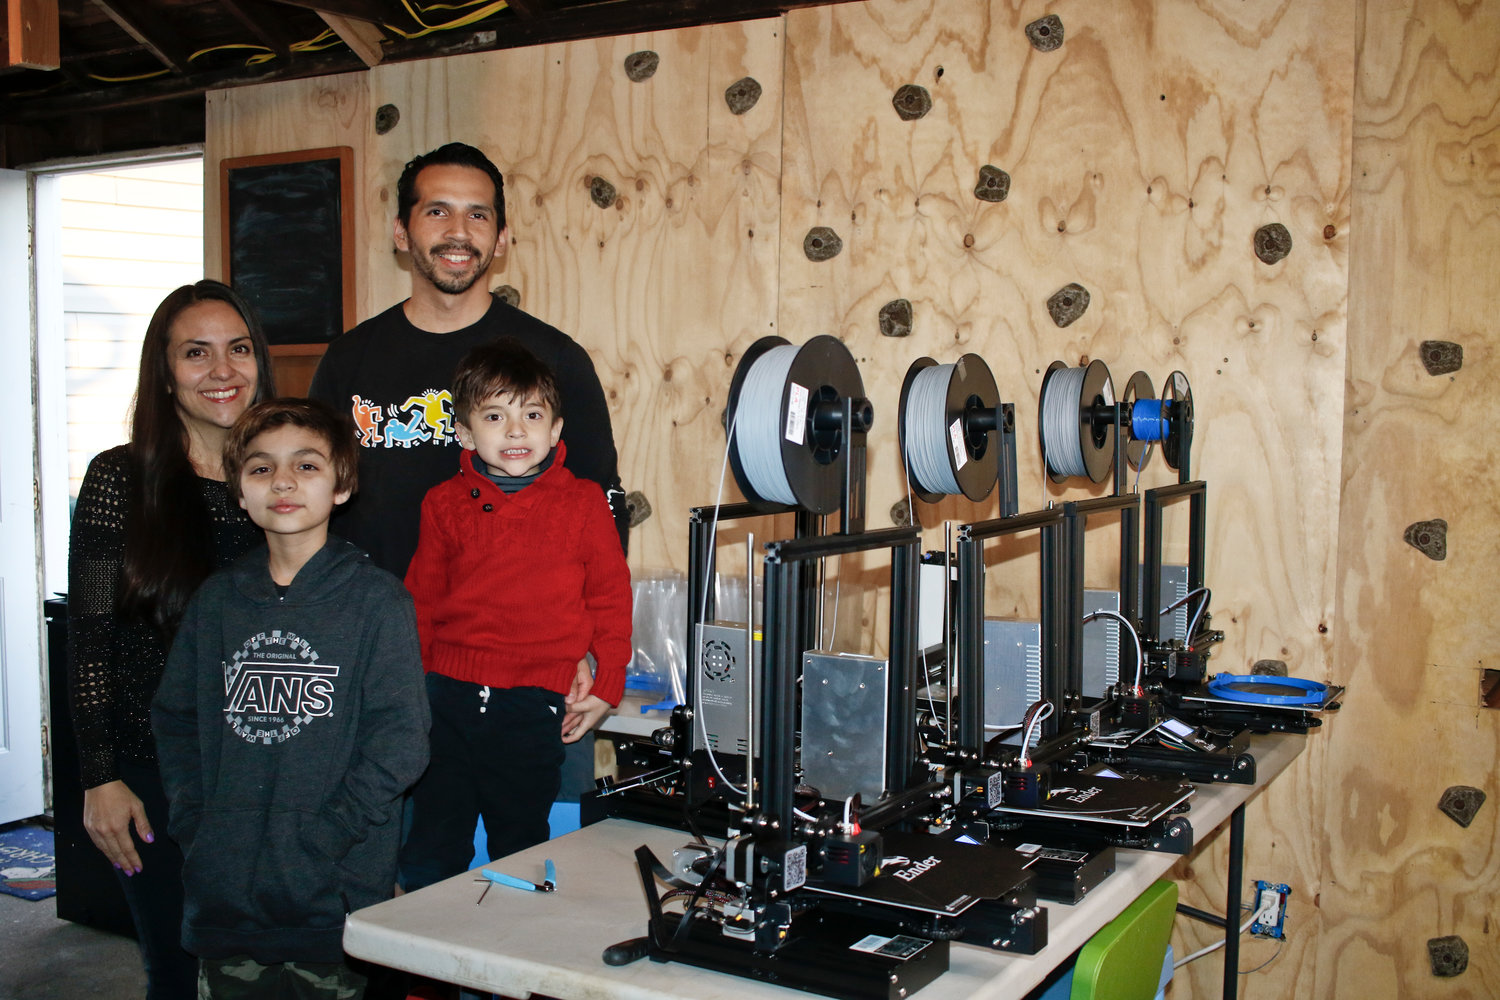 Andrea and Rich Rengel and their sons, Sebastian, 10, and Oliver, 4, converted their garage into a 3D printing workshop to build face shields for local healthcare workers.